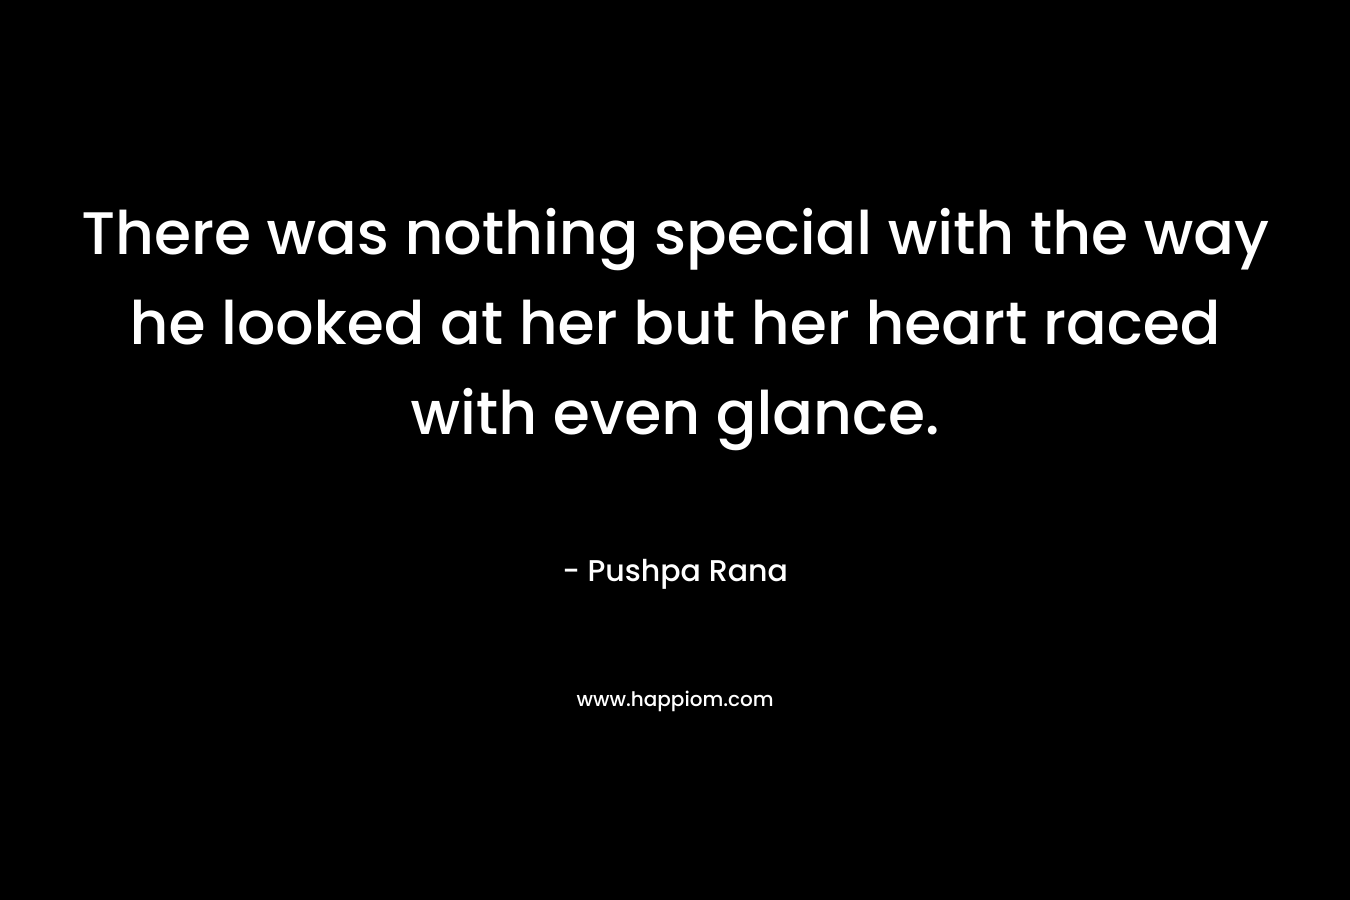 There was nothing special with the way he looked at her but her heart raced with even glance. – Pushpa Rana